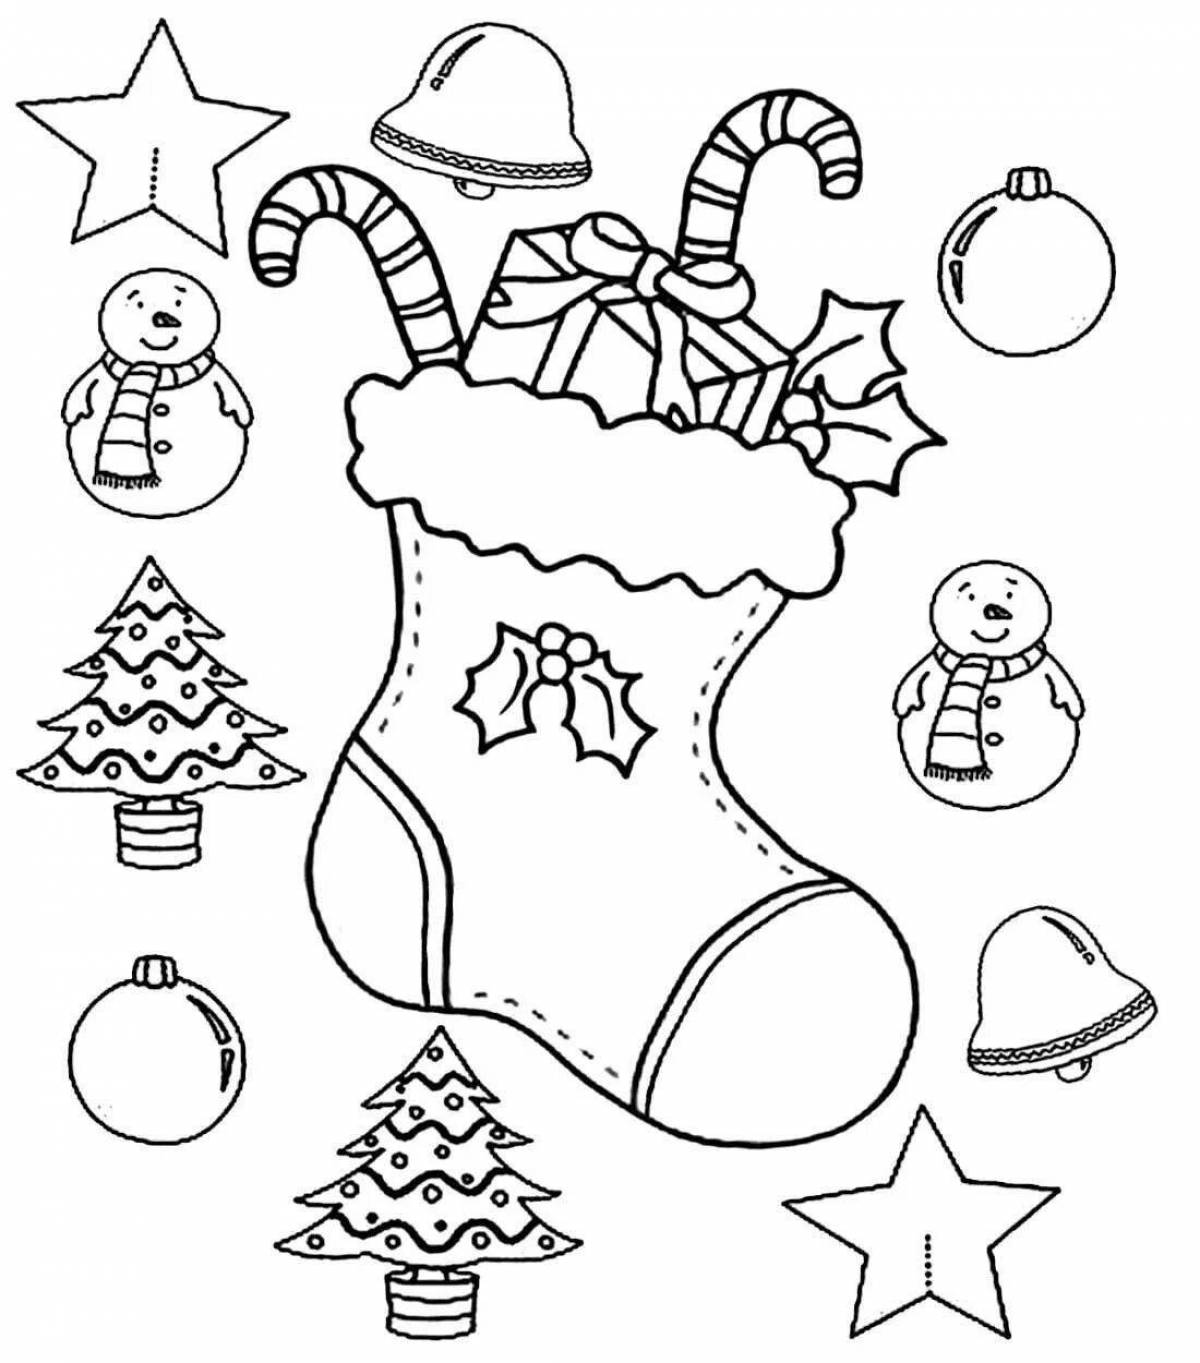 Gorgeous Christmas coloring book